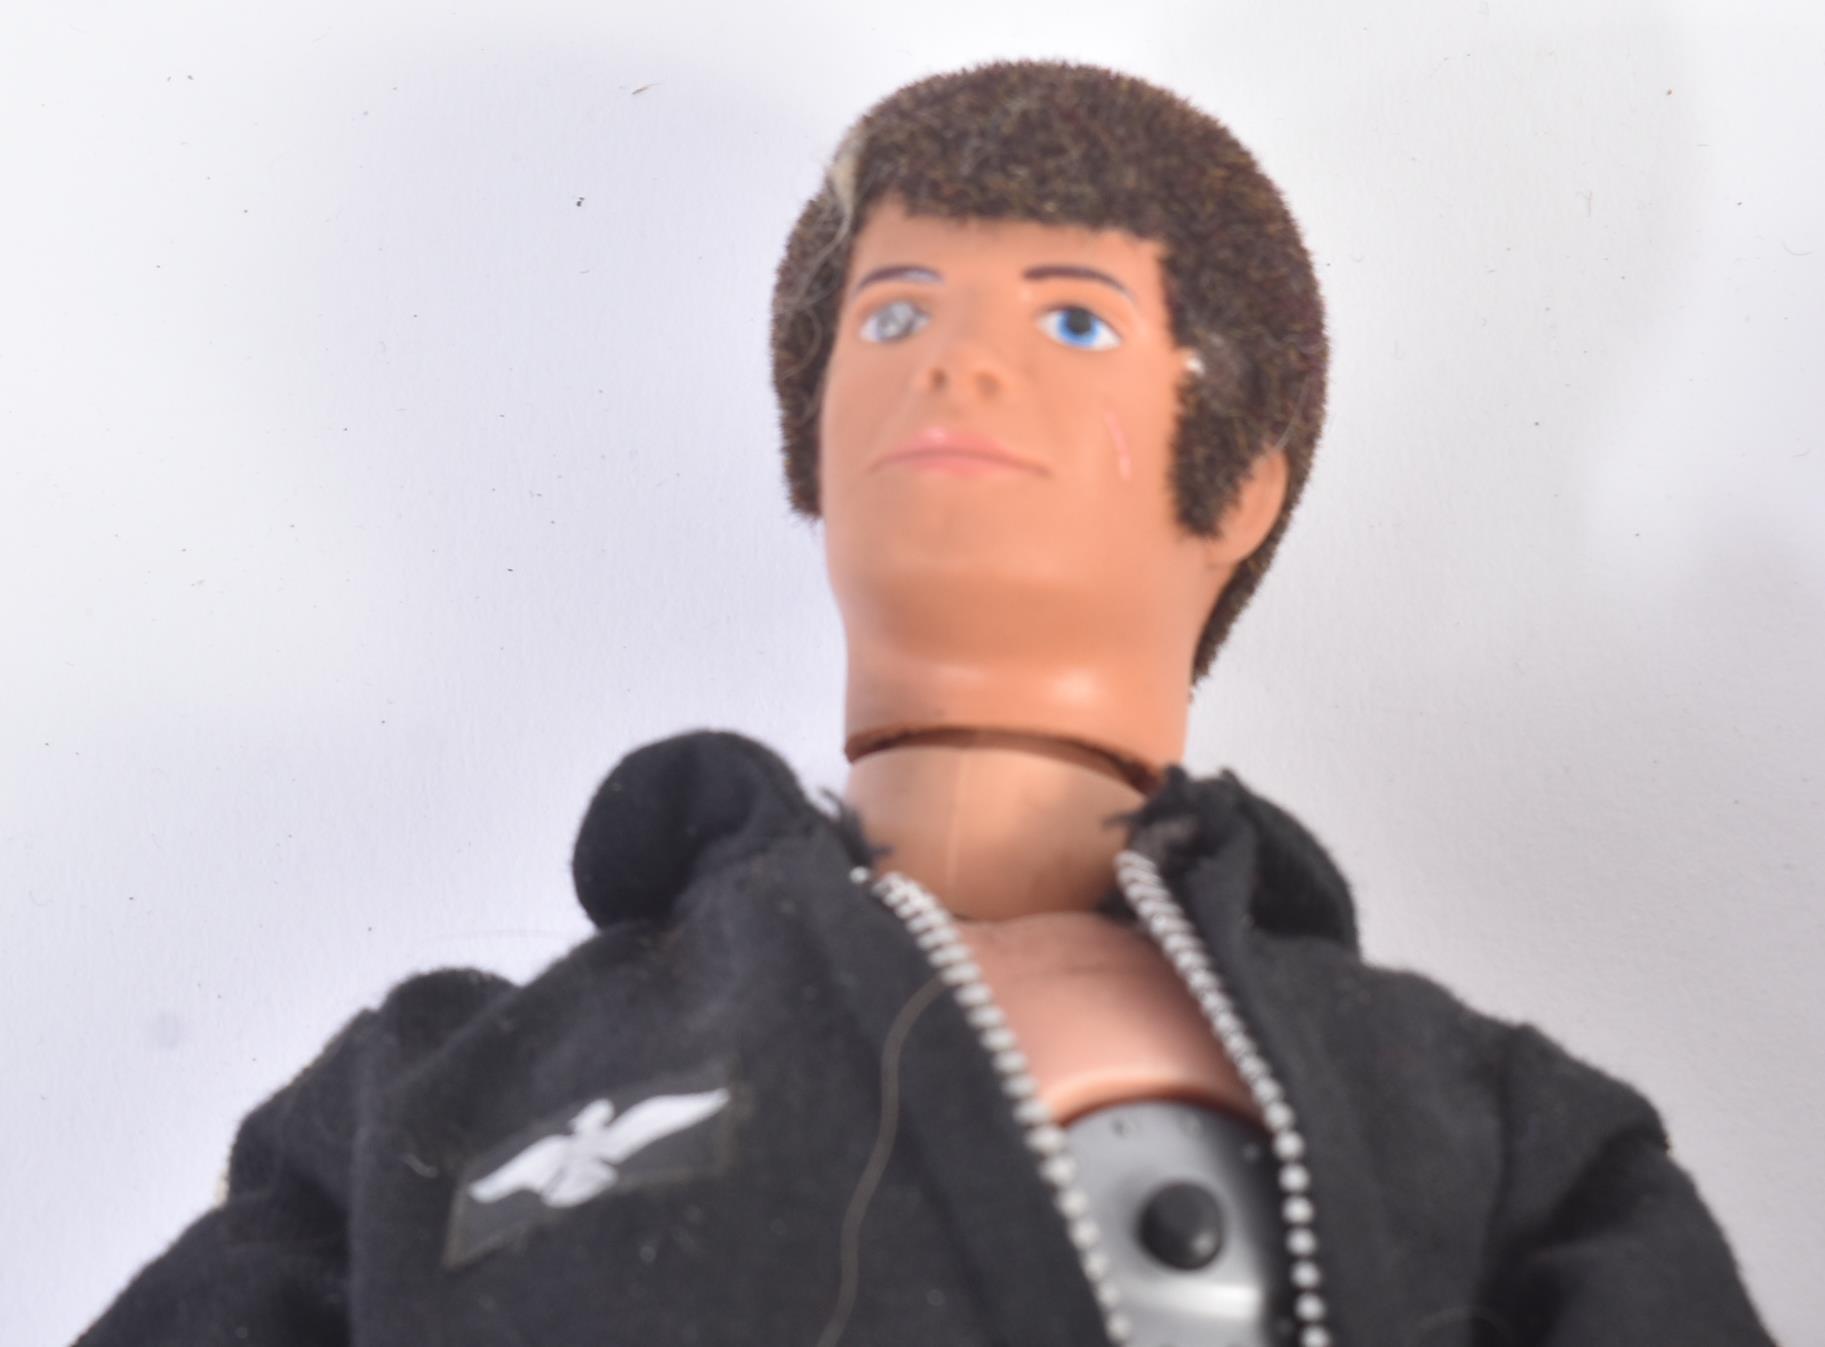 TWO VINTAGE PALITOY ACTION MAN ACTION FIGURES - Image 5 of 6